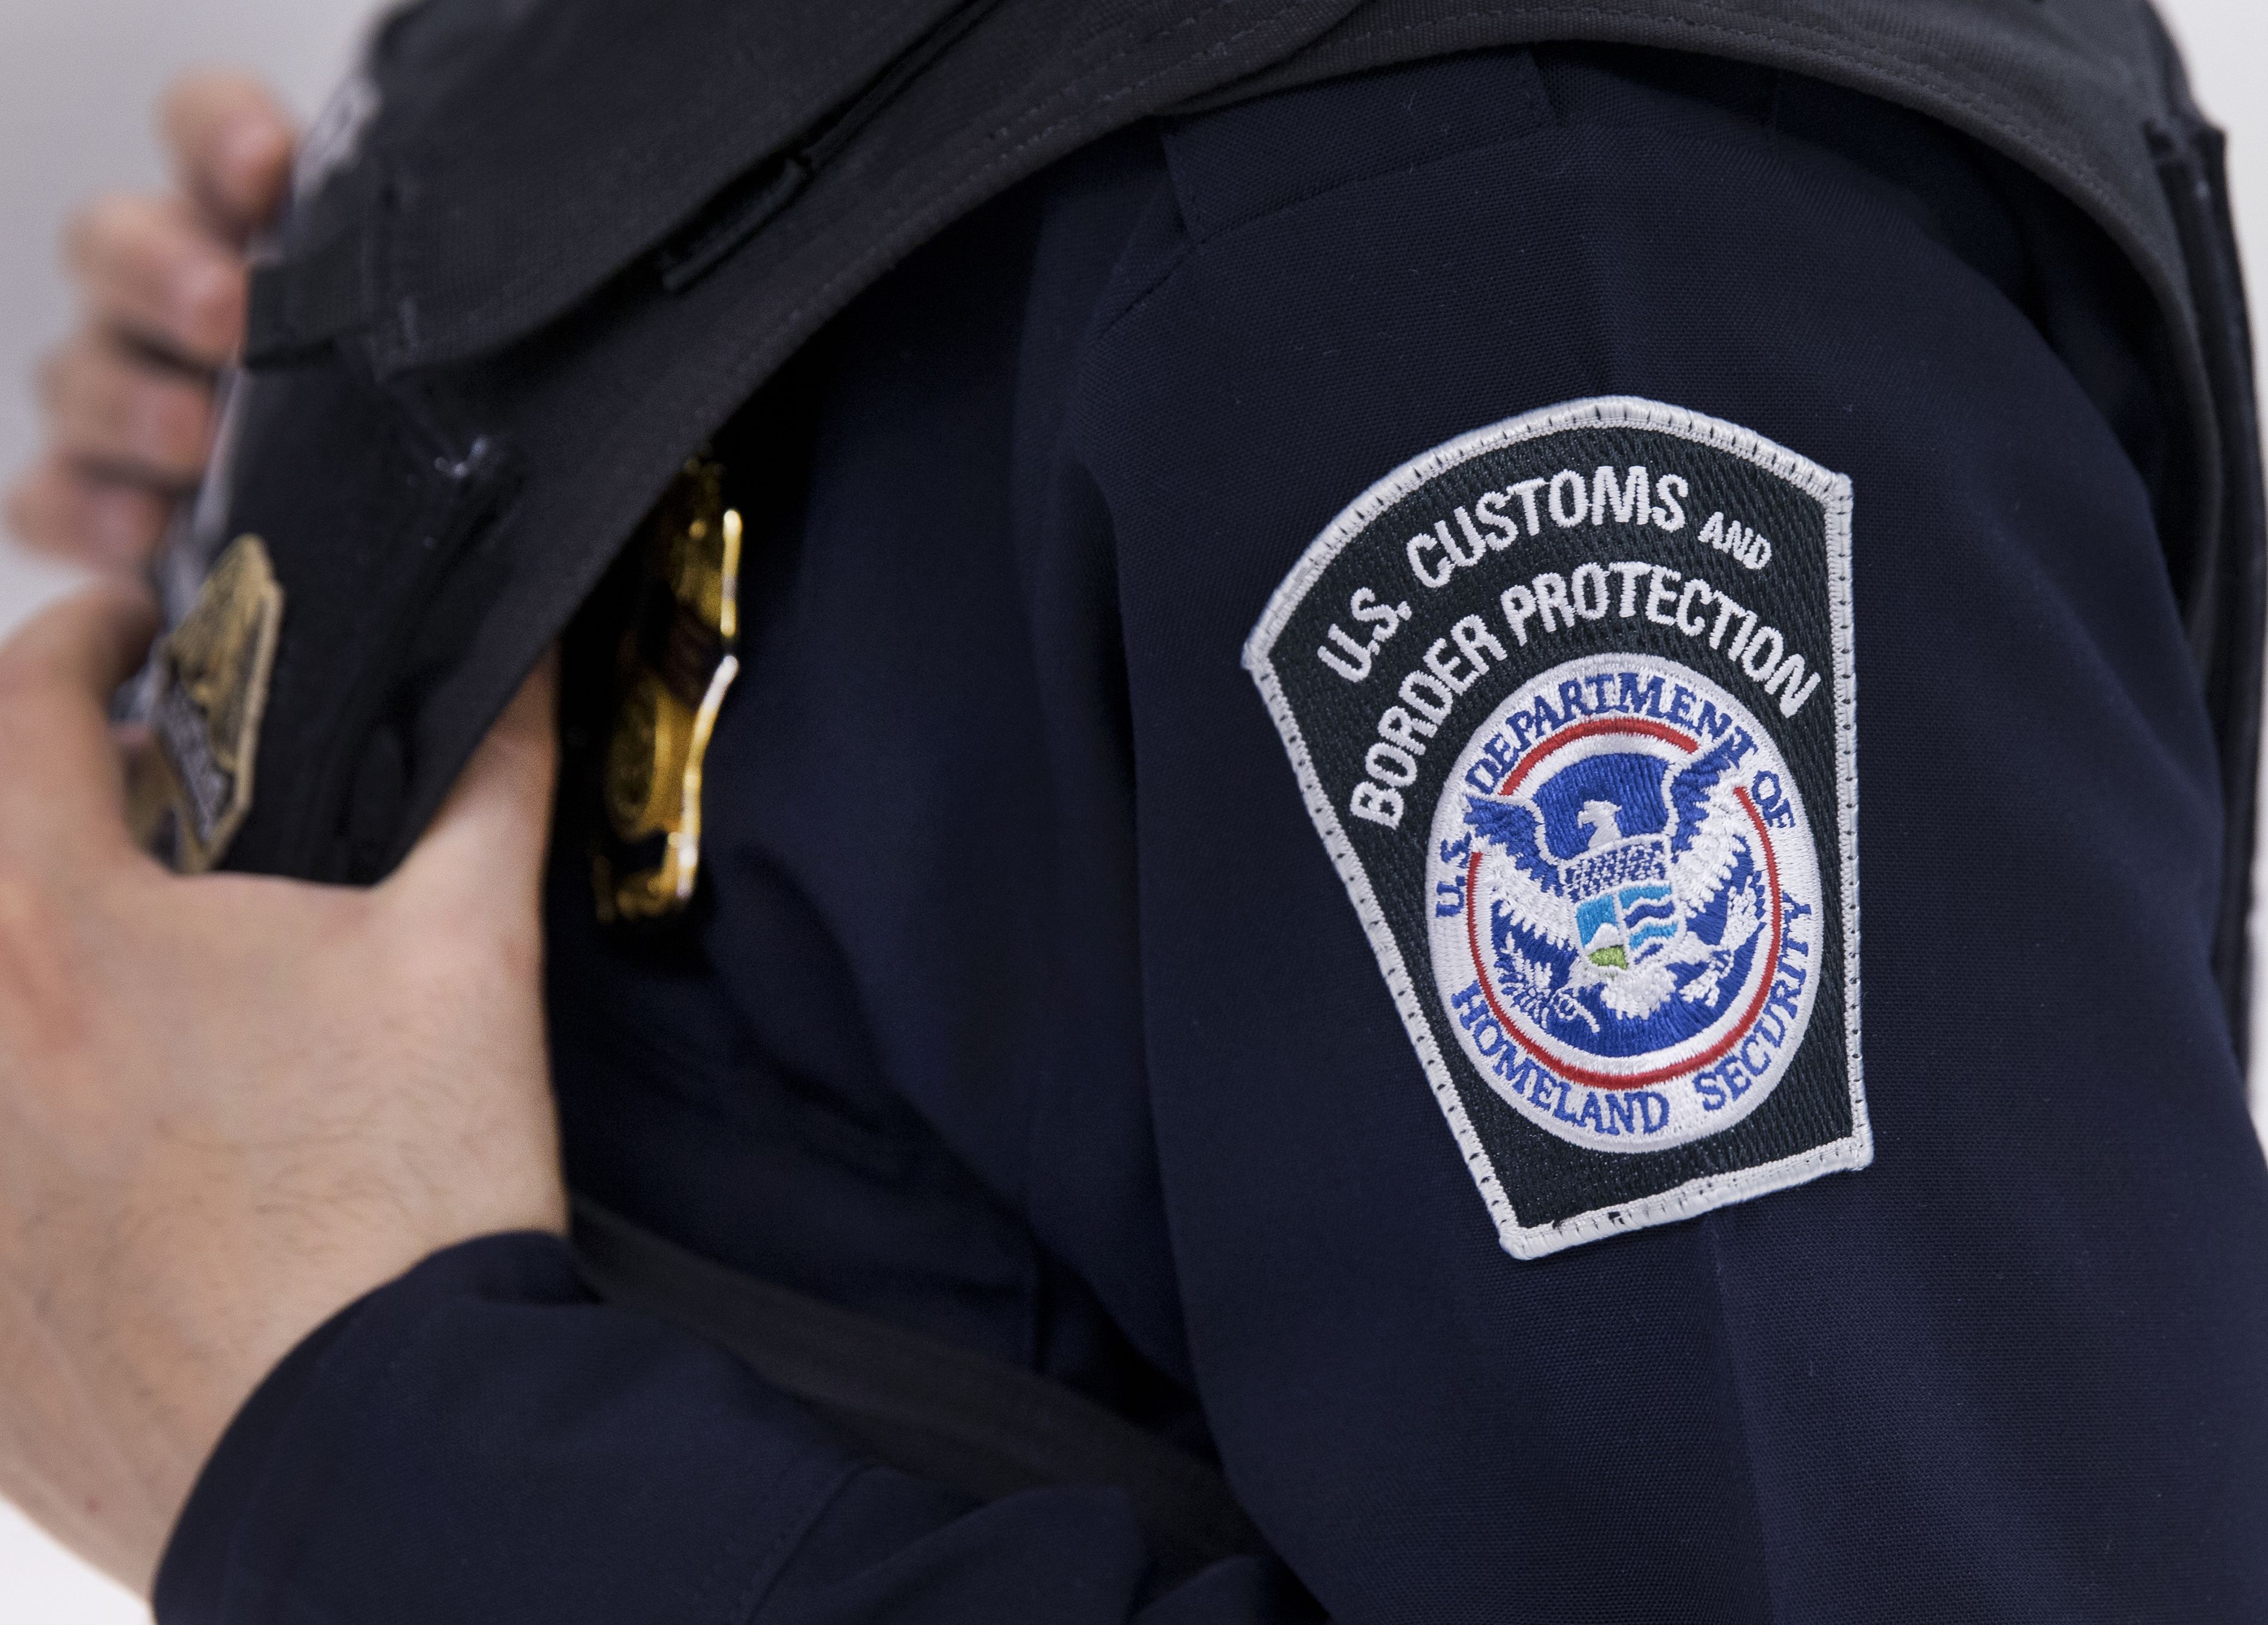 What if CBP had to take an exam to administer the customs broker